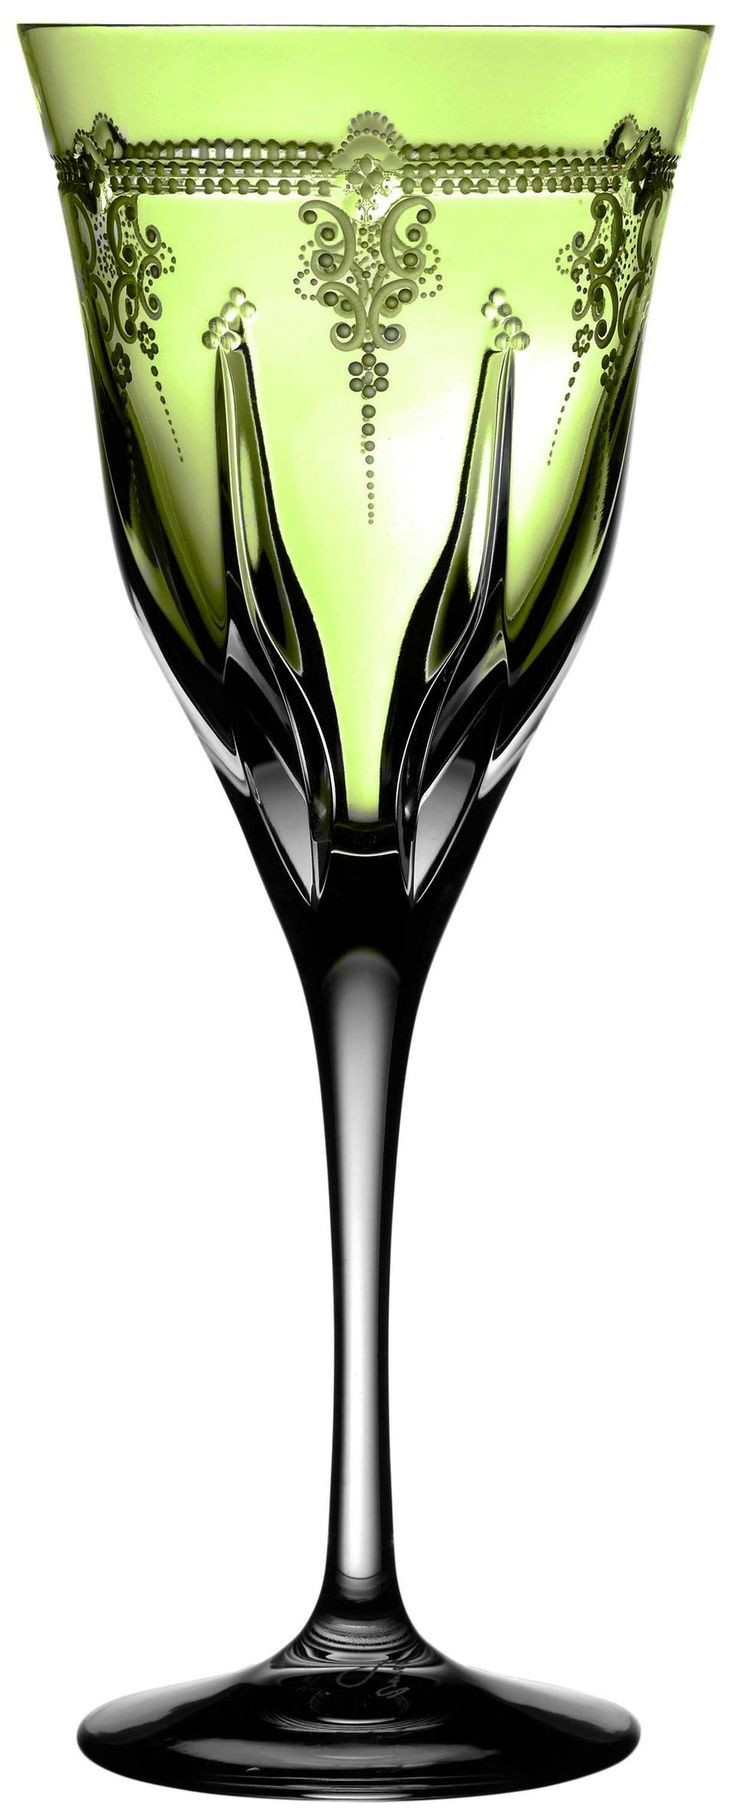 21 Spectacular William Yeoward Crystal Vase 2024 free download william yeoward crystal vase of 438 best vestir la mesa images on pinterest dishes floral in lisbon yellow green water glass varga in yardley pa